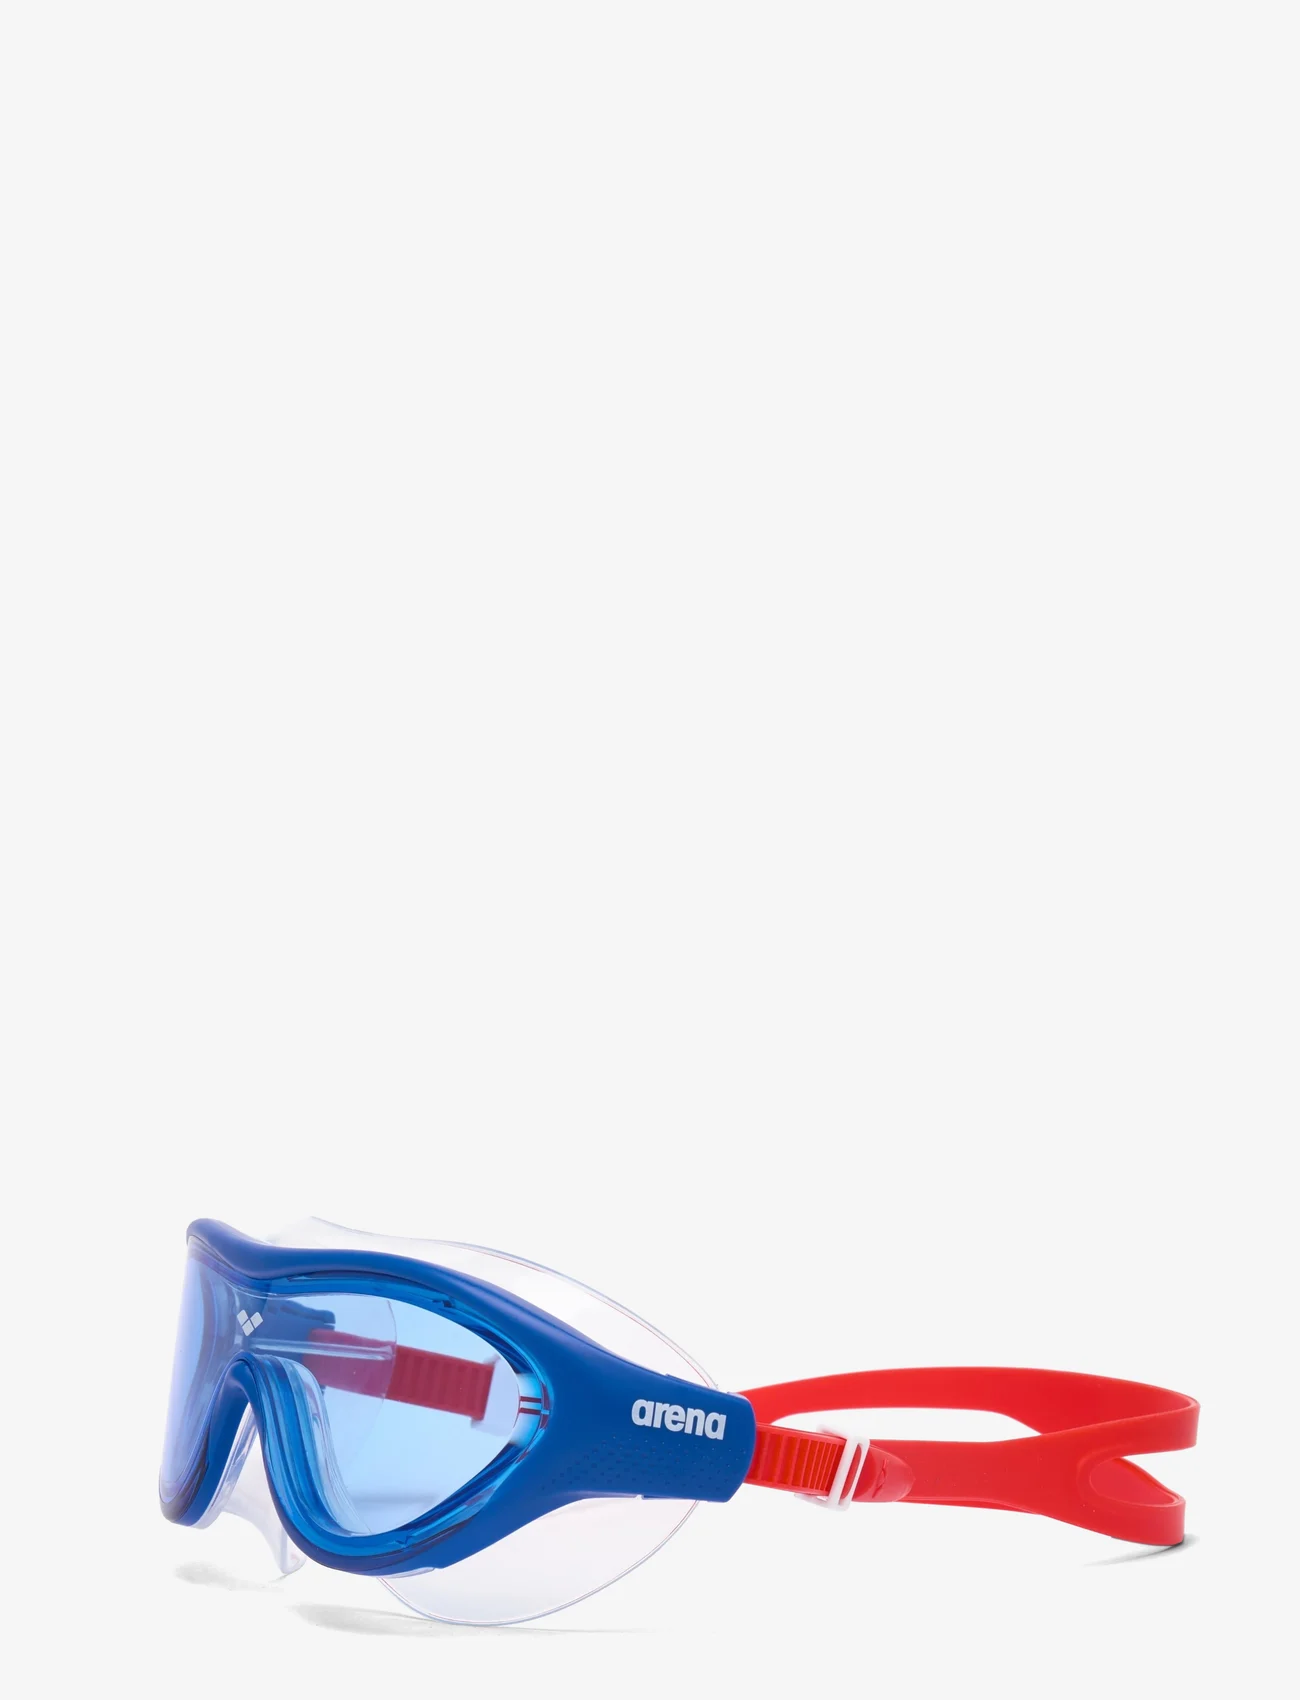 Arena - THE ONE MASK JR BLUE-BLUE-RED - zwemaccessoires - blue-blue-red - 1